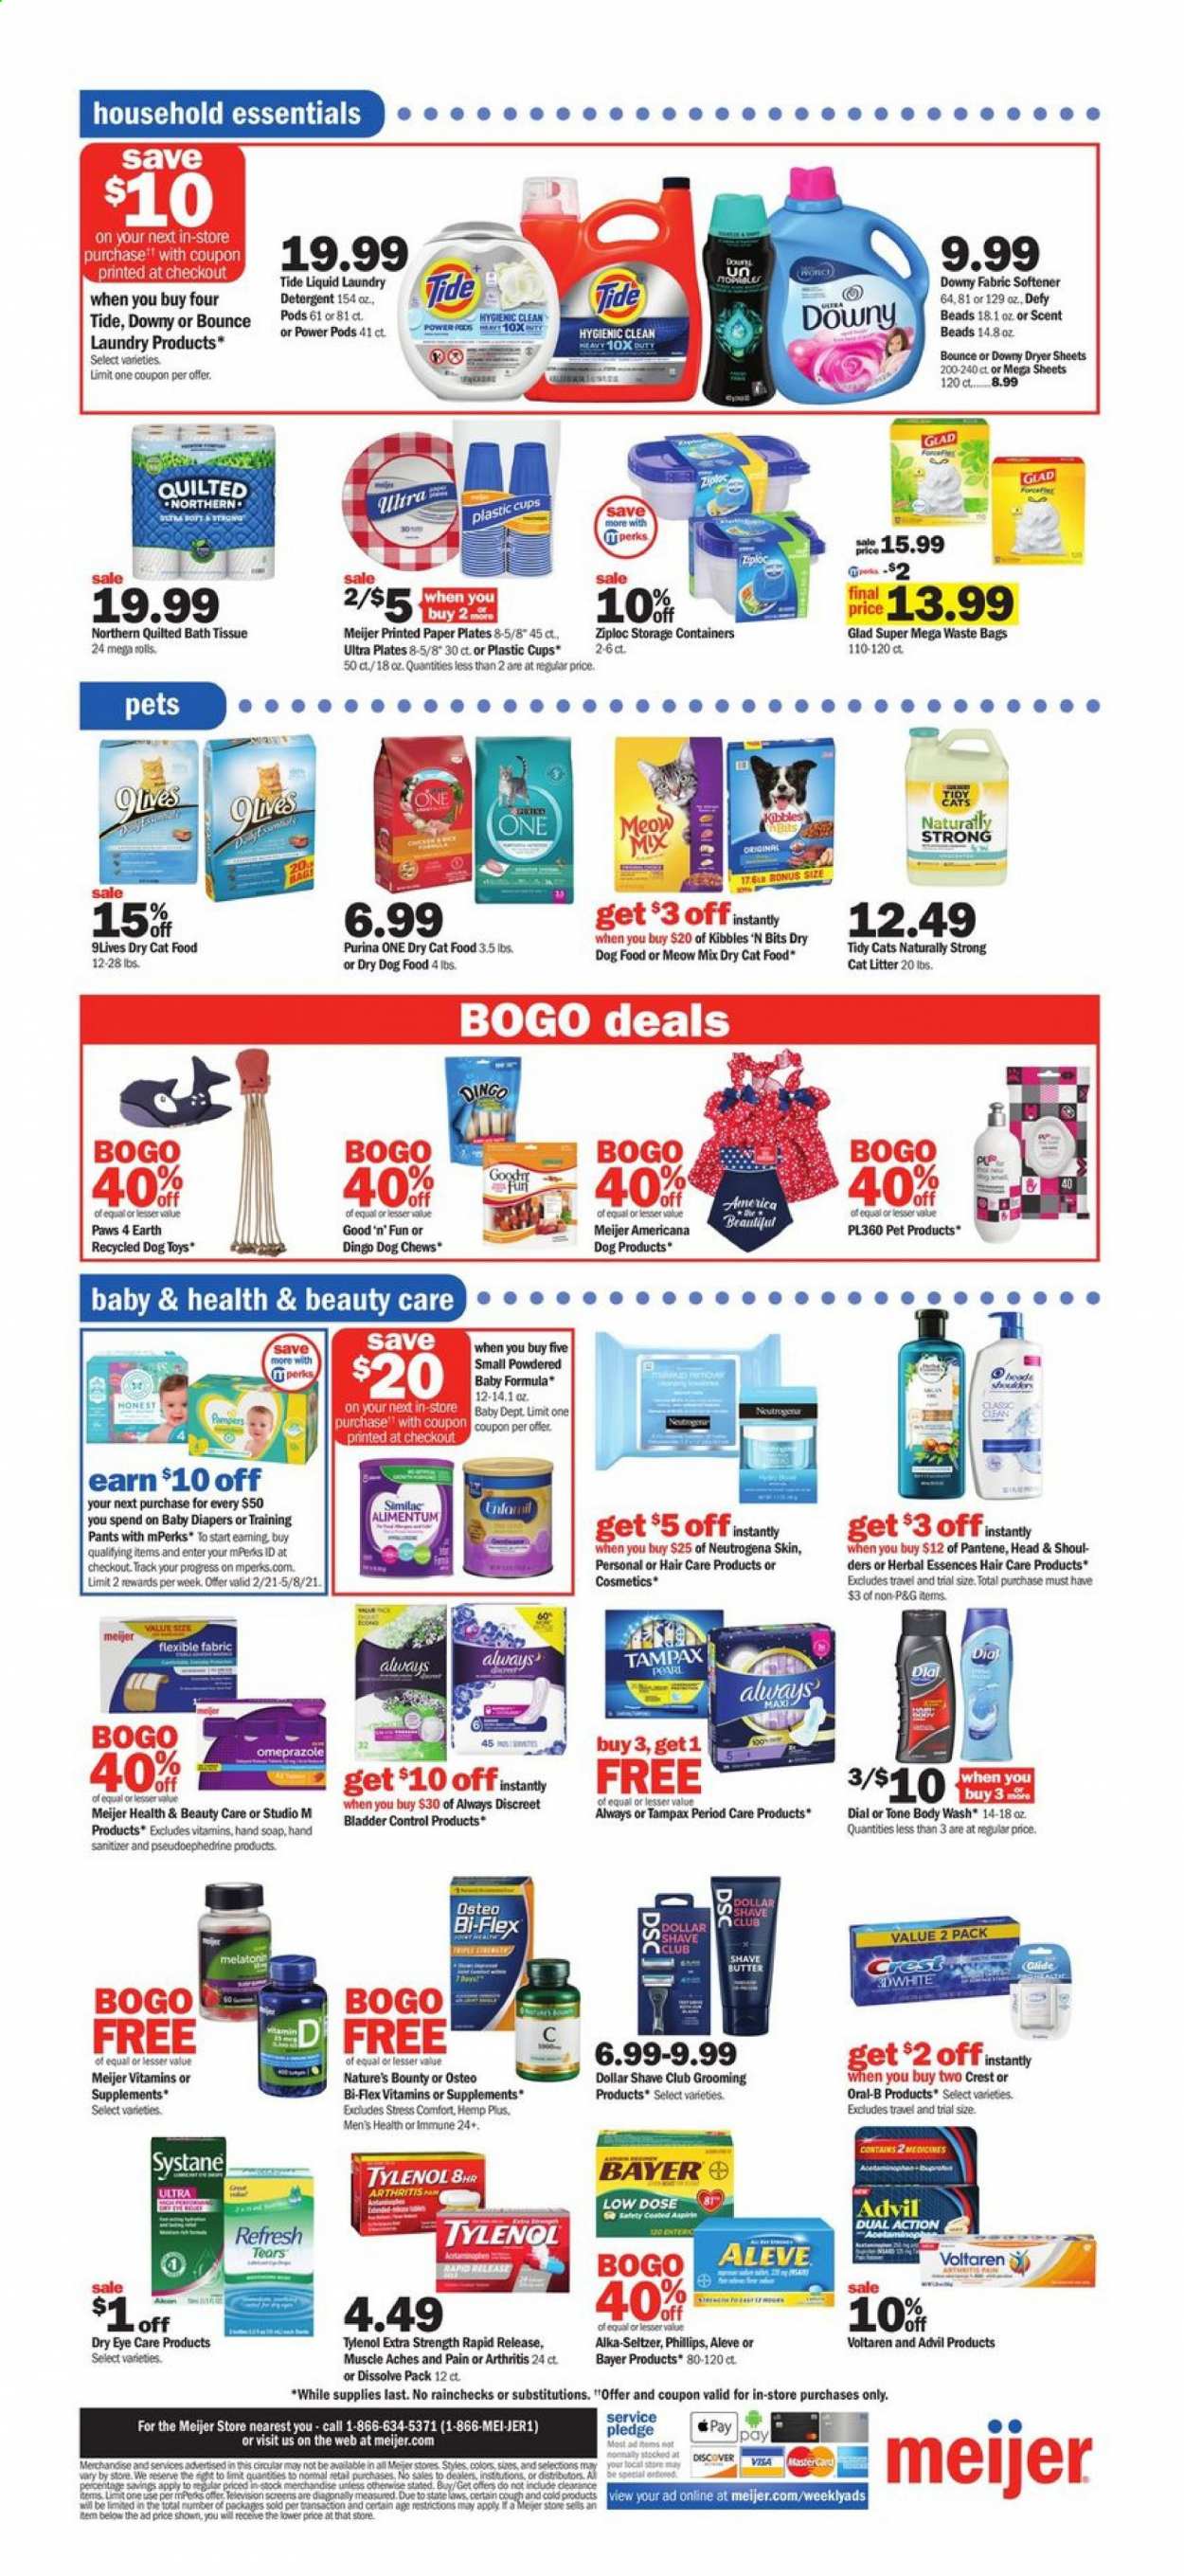 thumbnail - Meijer Flyer - 05/02/2021 - 05/08/2021 - Sales products - butter, Similac, Pampers, pants, nappies, baby pants, bath tissue, detergent, Pledge, Tide, fabric softener, laundry detergent, dryer sheets, Downy Laundry, body wash, hand soap, Dial, soap, Oral-B, Crest, Tampax, Always Discreet, Neutrogena, Dollar Shave Club, Pantene, Herbal Essences, hand sanitizer, Ziploc, trash bags, plate, pan, cup, paper, cat litter, dog toy, Paws, animal food, animal treats, cat food, dog food, Purina, Good 'n' Fun, 9lives, dry dog food, dog chews, dry cat food, Meow Mix, bag, Aleve, Melatonin, Nature's Bounty, Systane, Tylenol, Osteo bi-flex, Bi-Flex, Advil Rapid, Alka-seltzer, Low Dose, Bayer. Page 14.